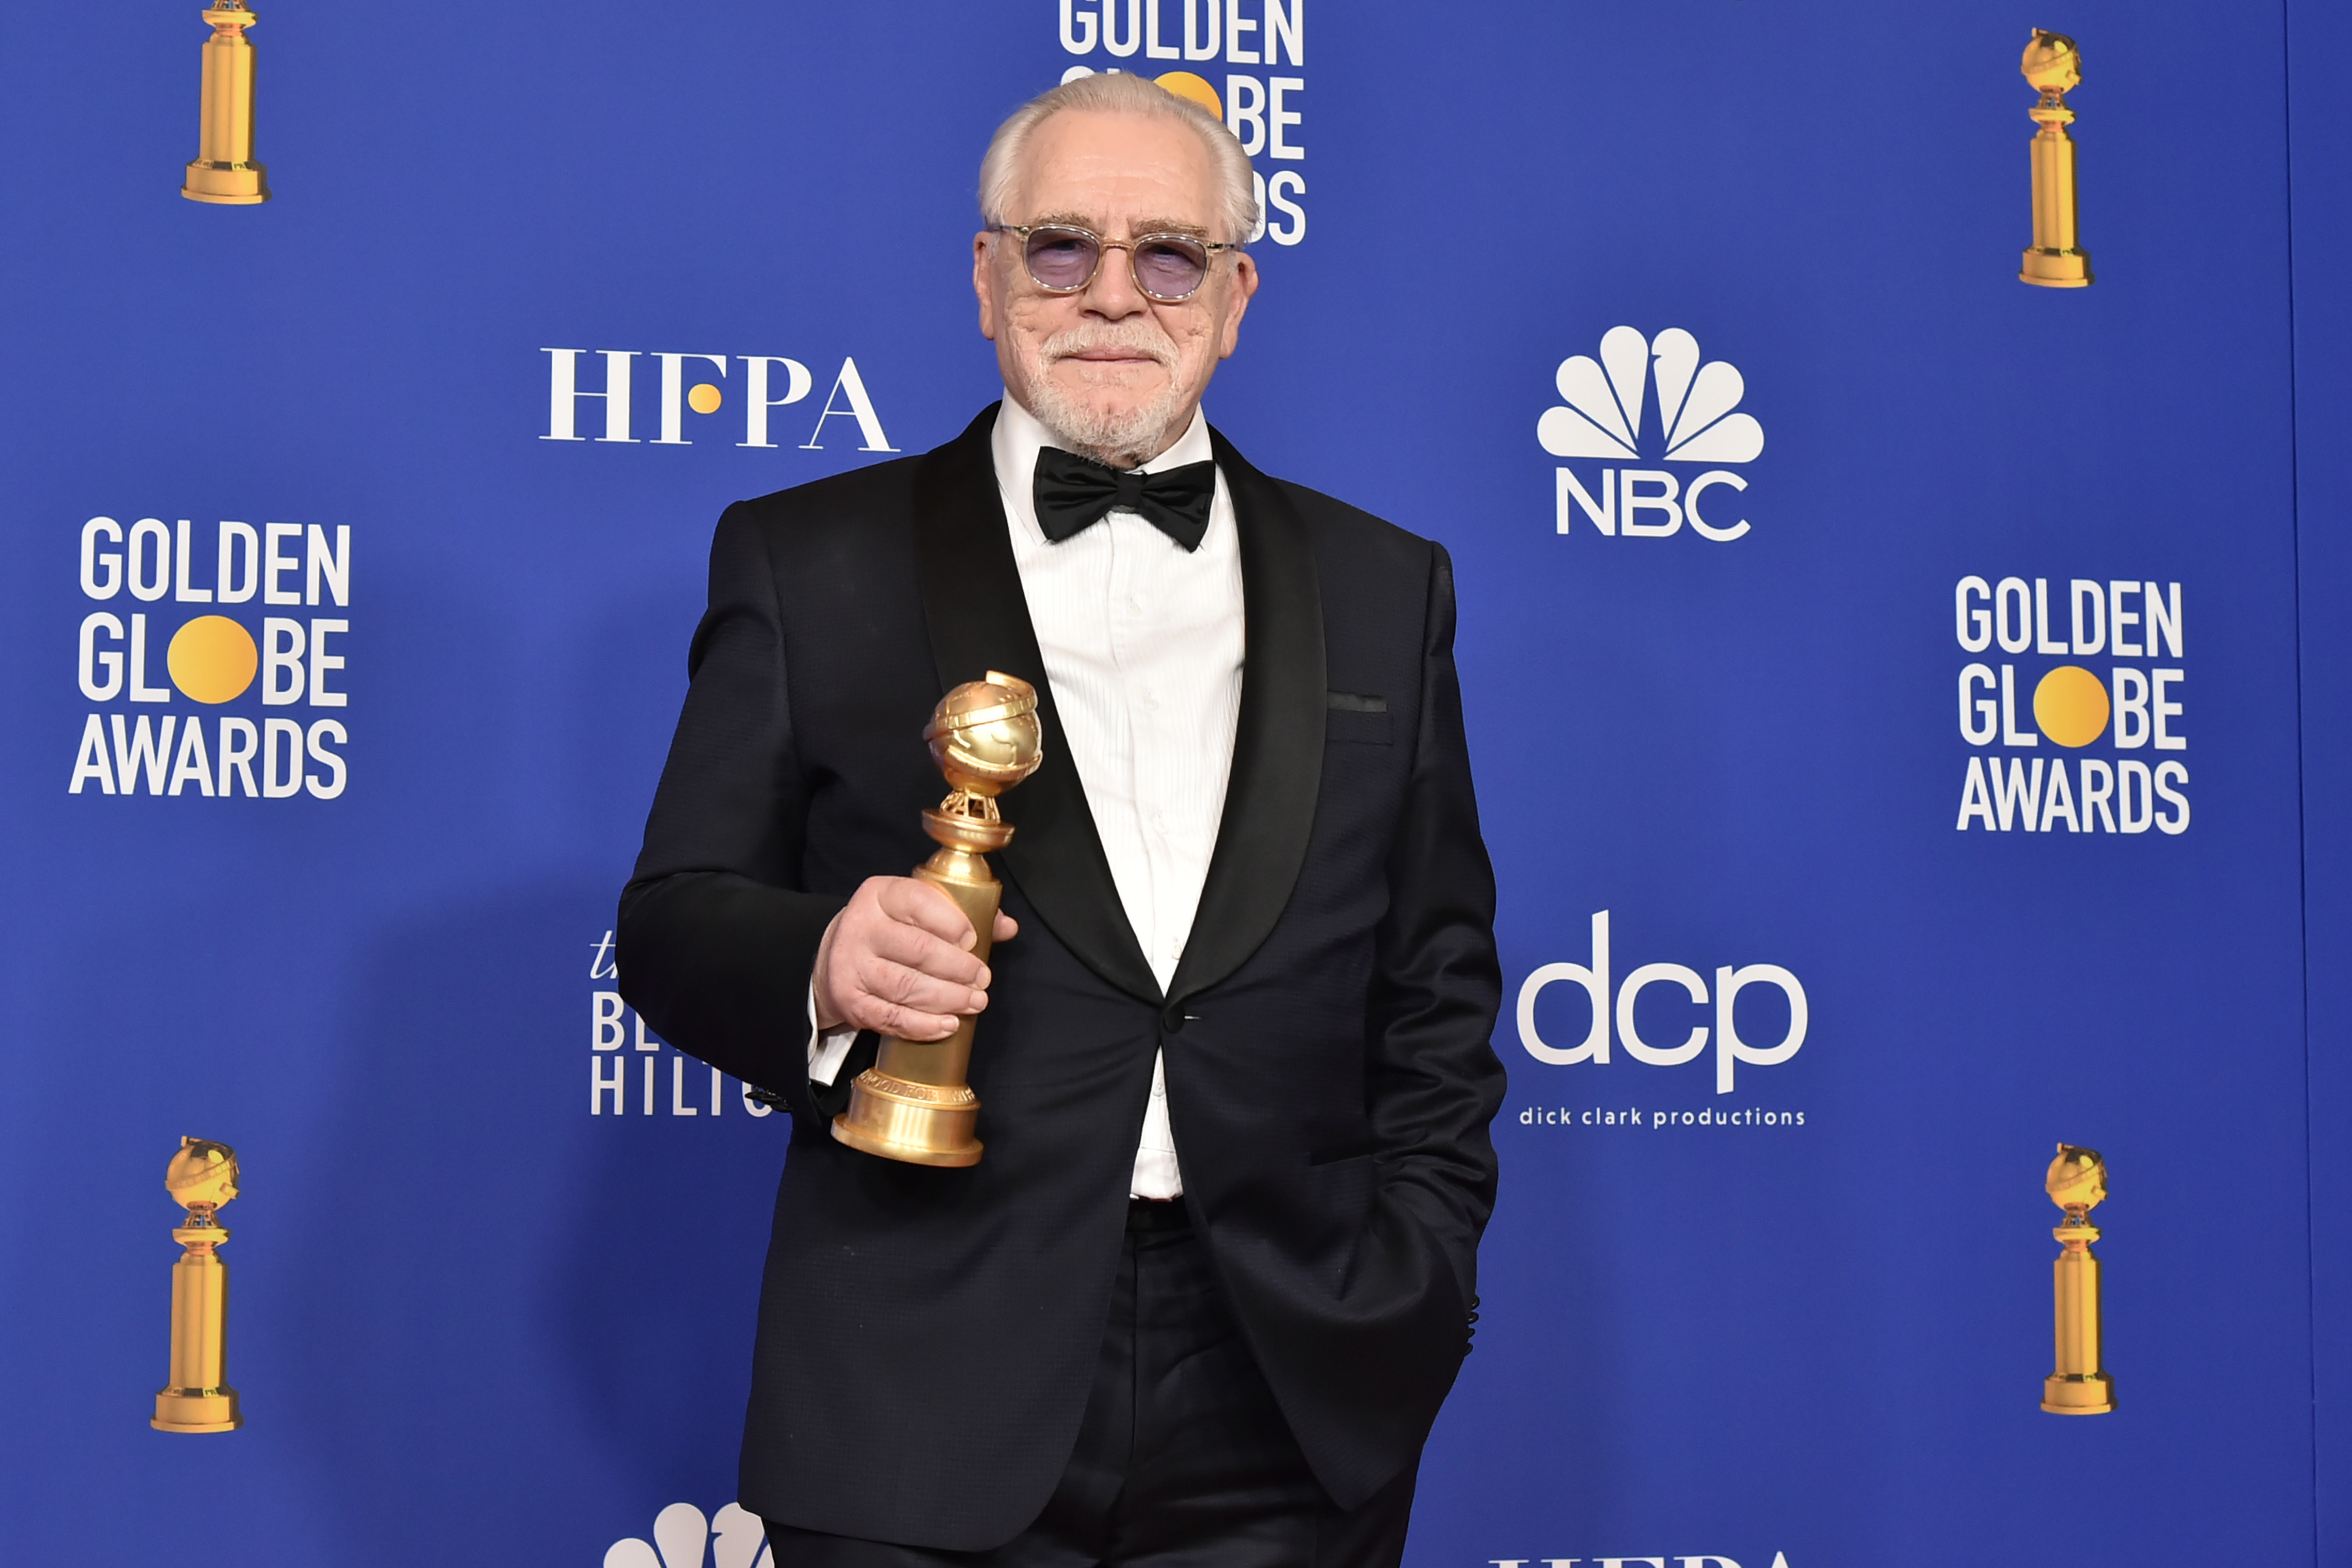 Succession actor Brian Cox in a tuxedo and sunglasses with an award.